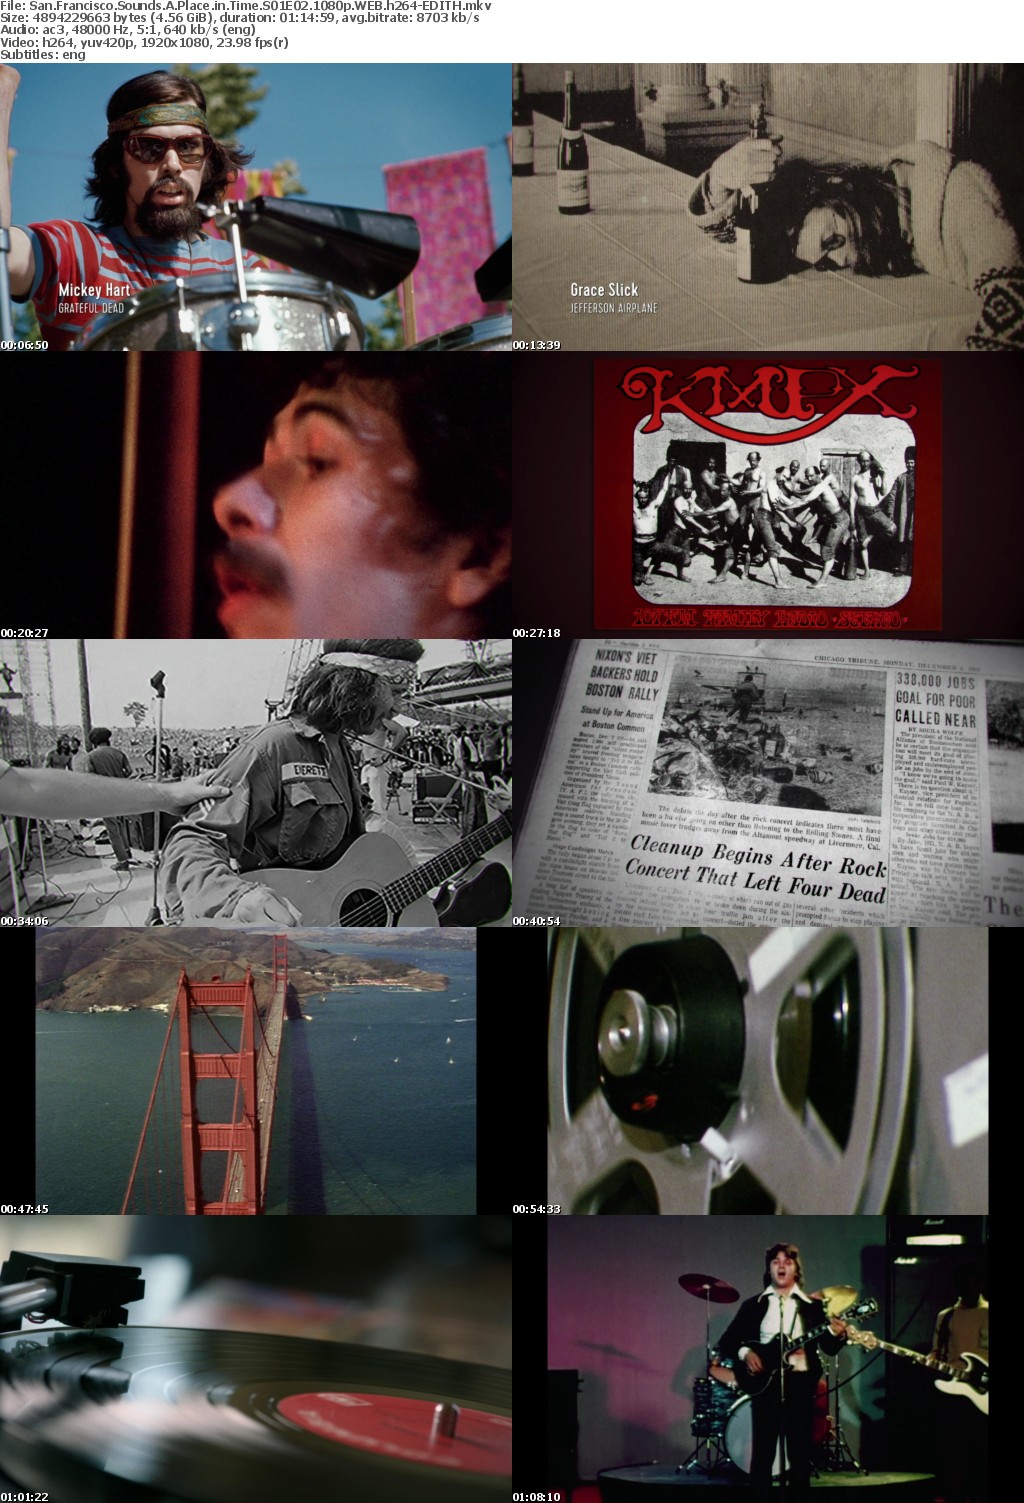 San Francisco Sounds A Place in Time S01E02 1080p WEB h264-EDITH